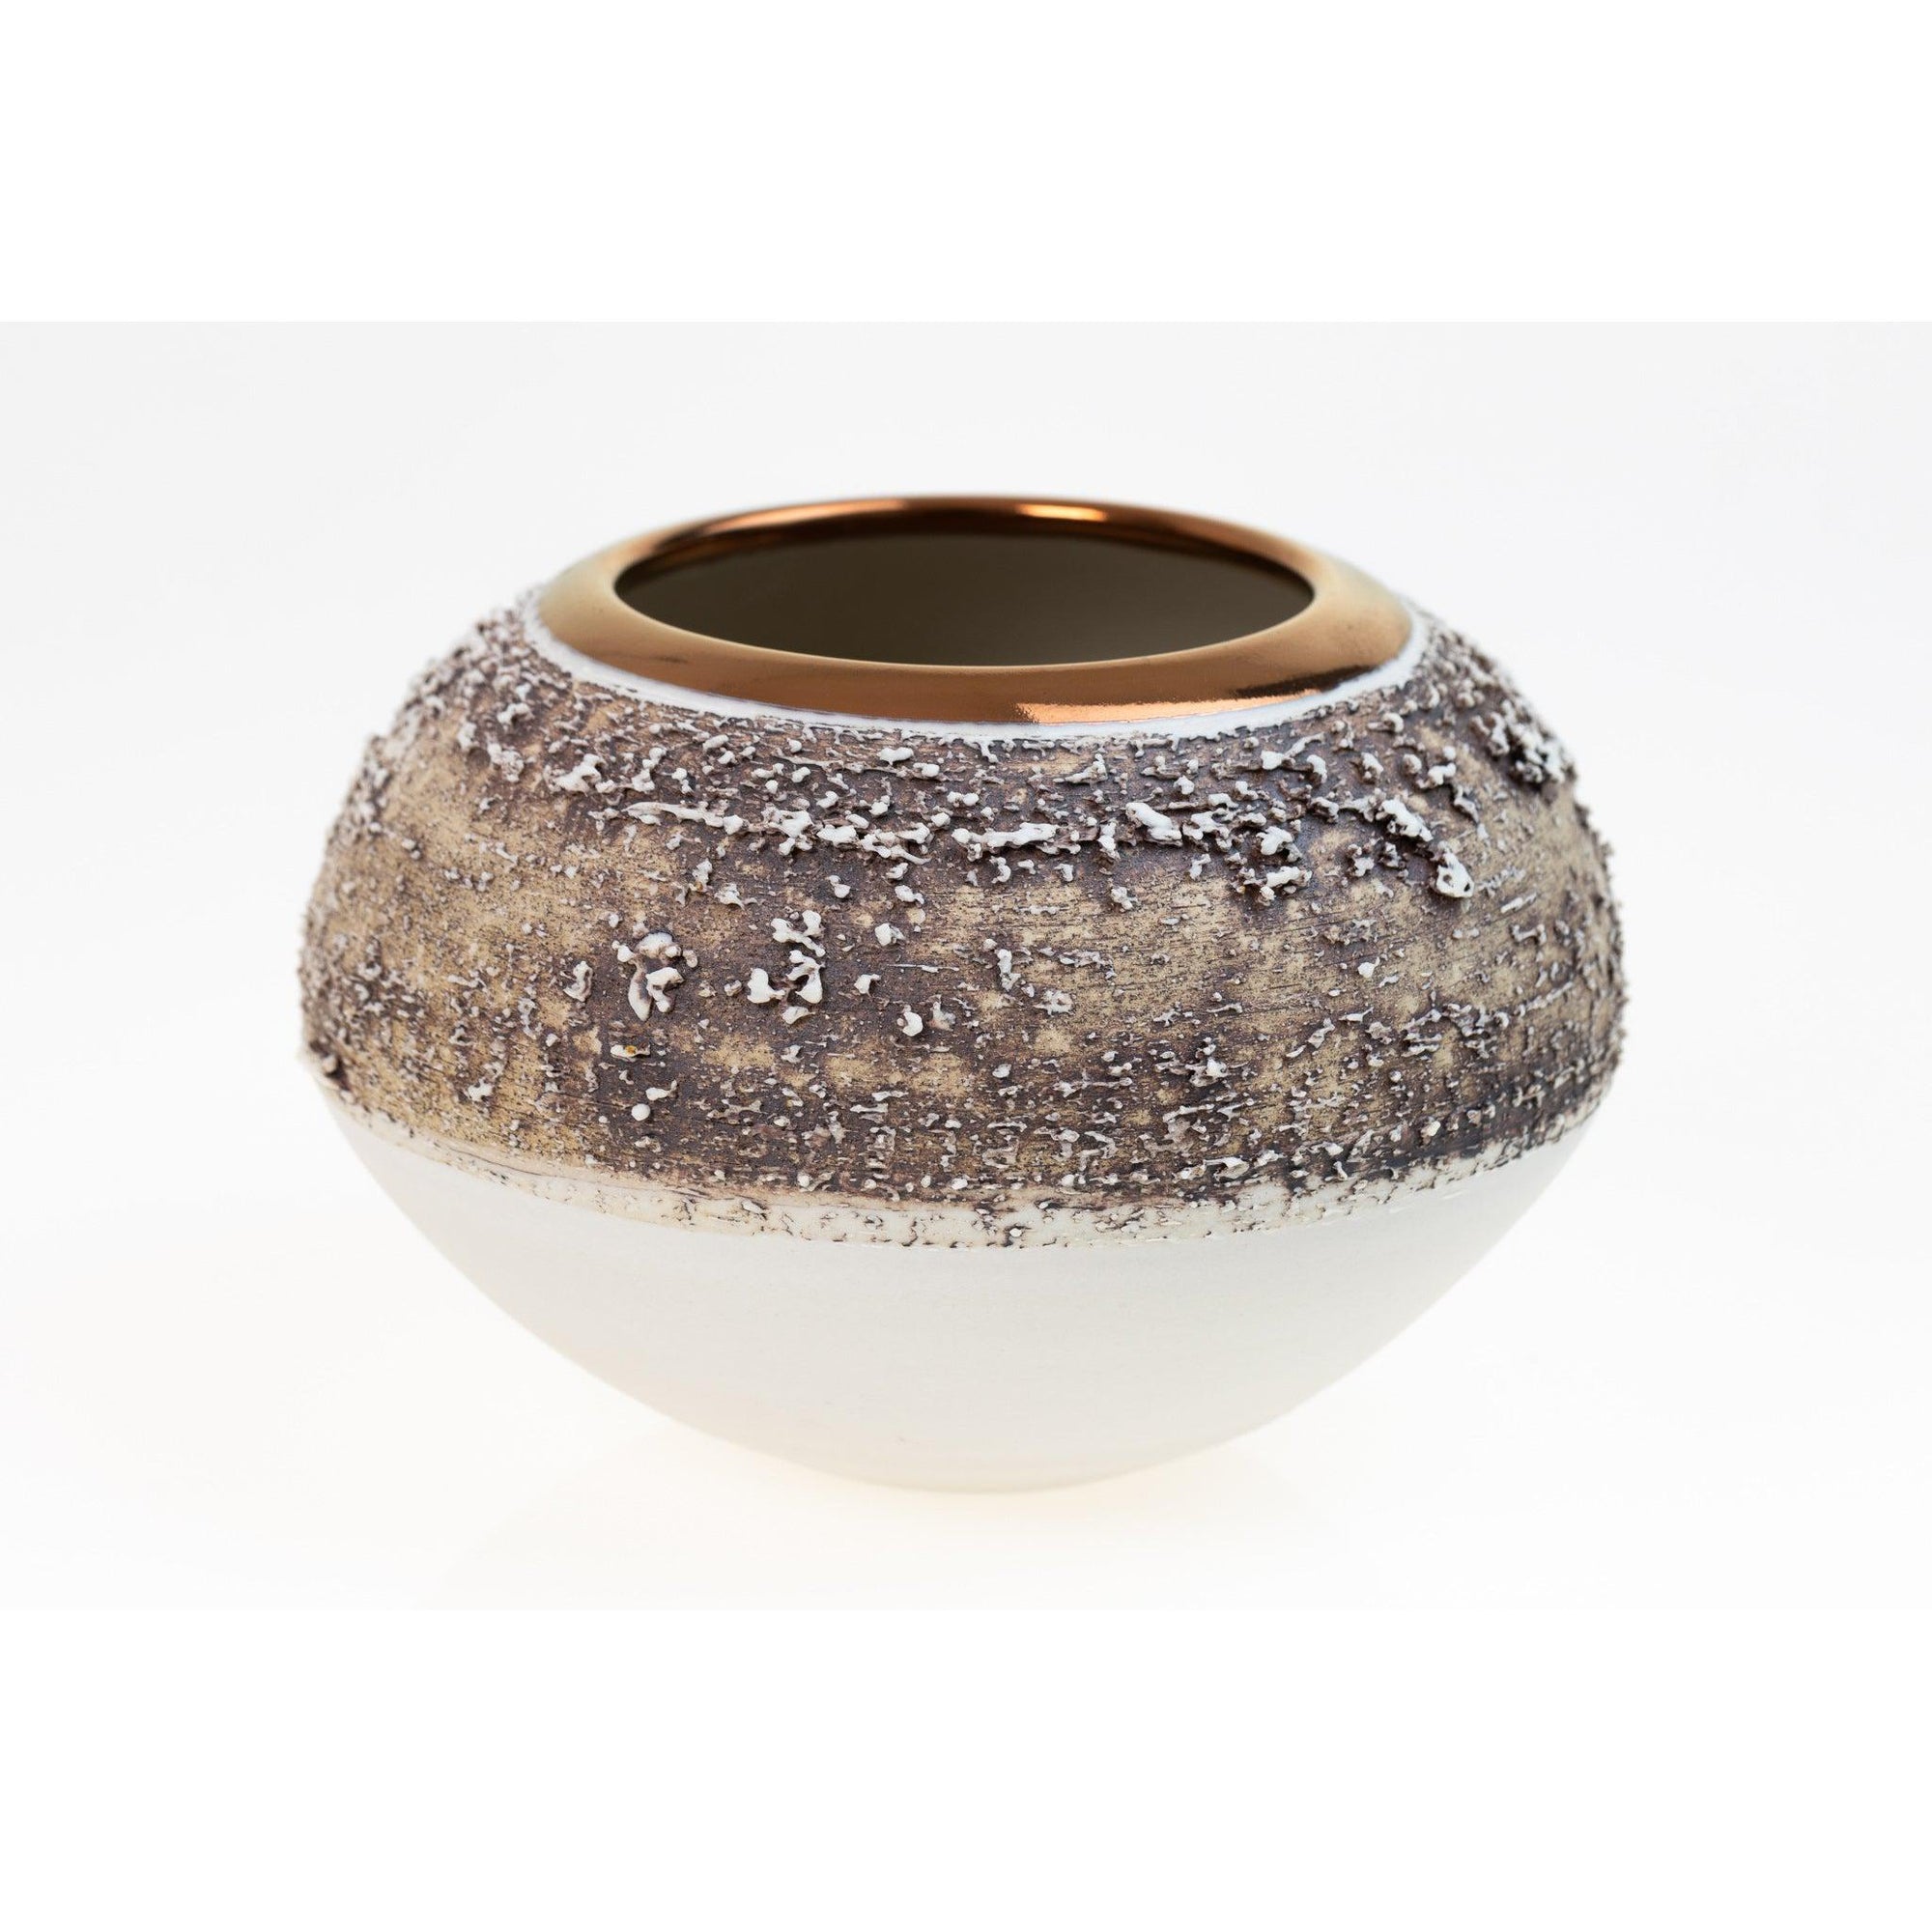 PGX30 Terra Textured Orb with Copper Lustre Rim by Alex McCarthy, available at Padstow Gallery, Cornwall